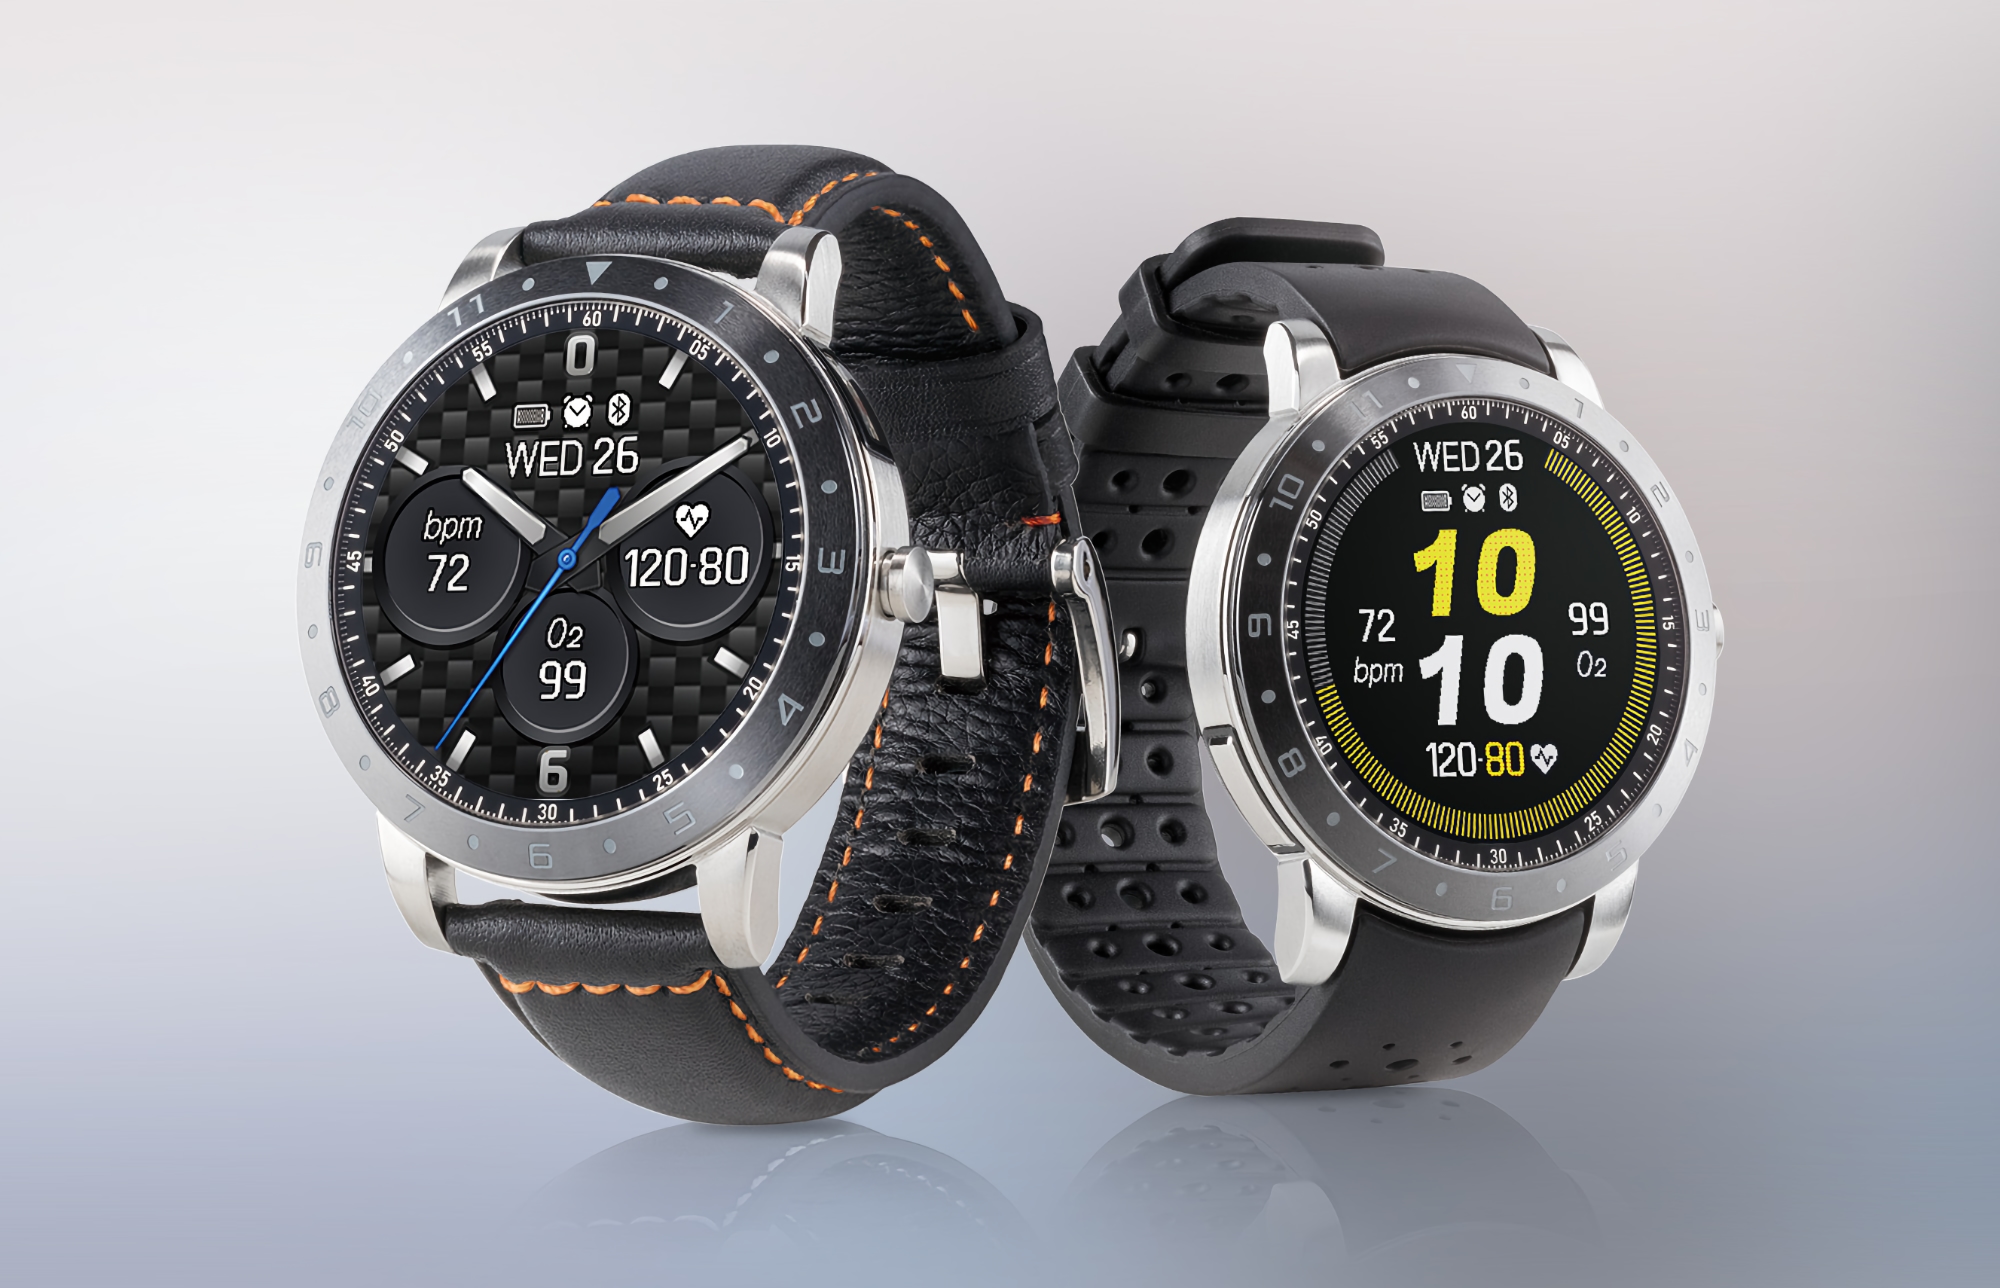 ASUS VivoWatch 5 smartwatch appeared on the company's website: OLED screen, SpO2 sensor, NFC and body temperature measurement function